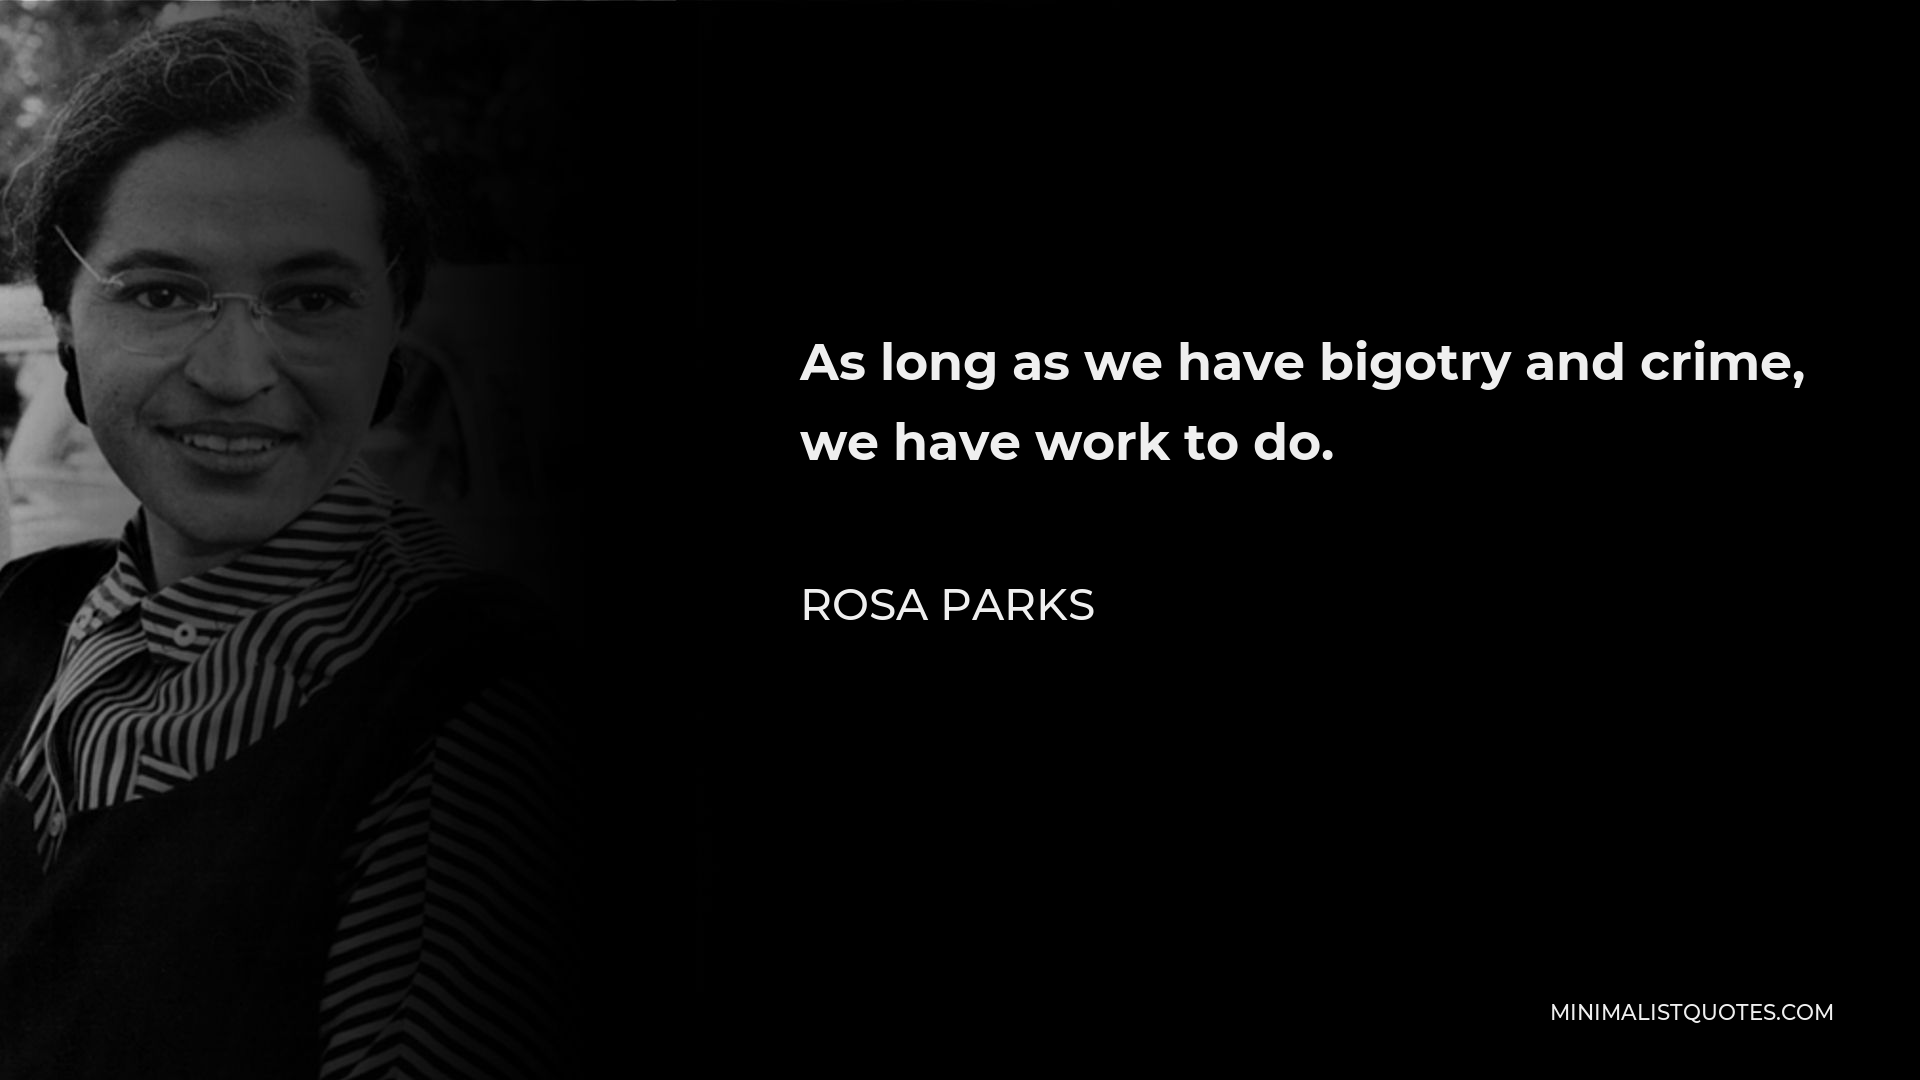 Rosa Parks Quote - As long as we have bigotry and crime, we have work to do.